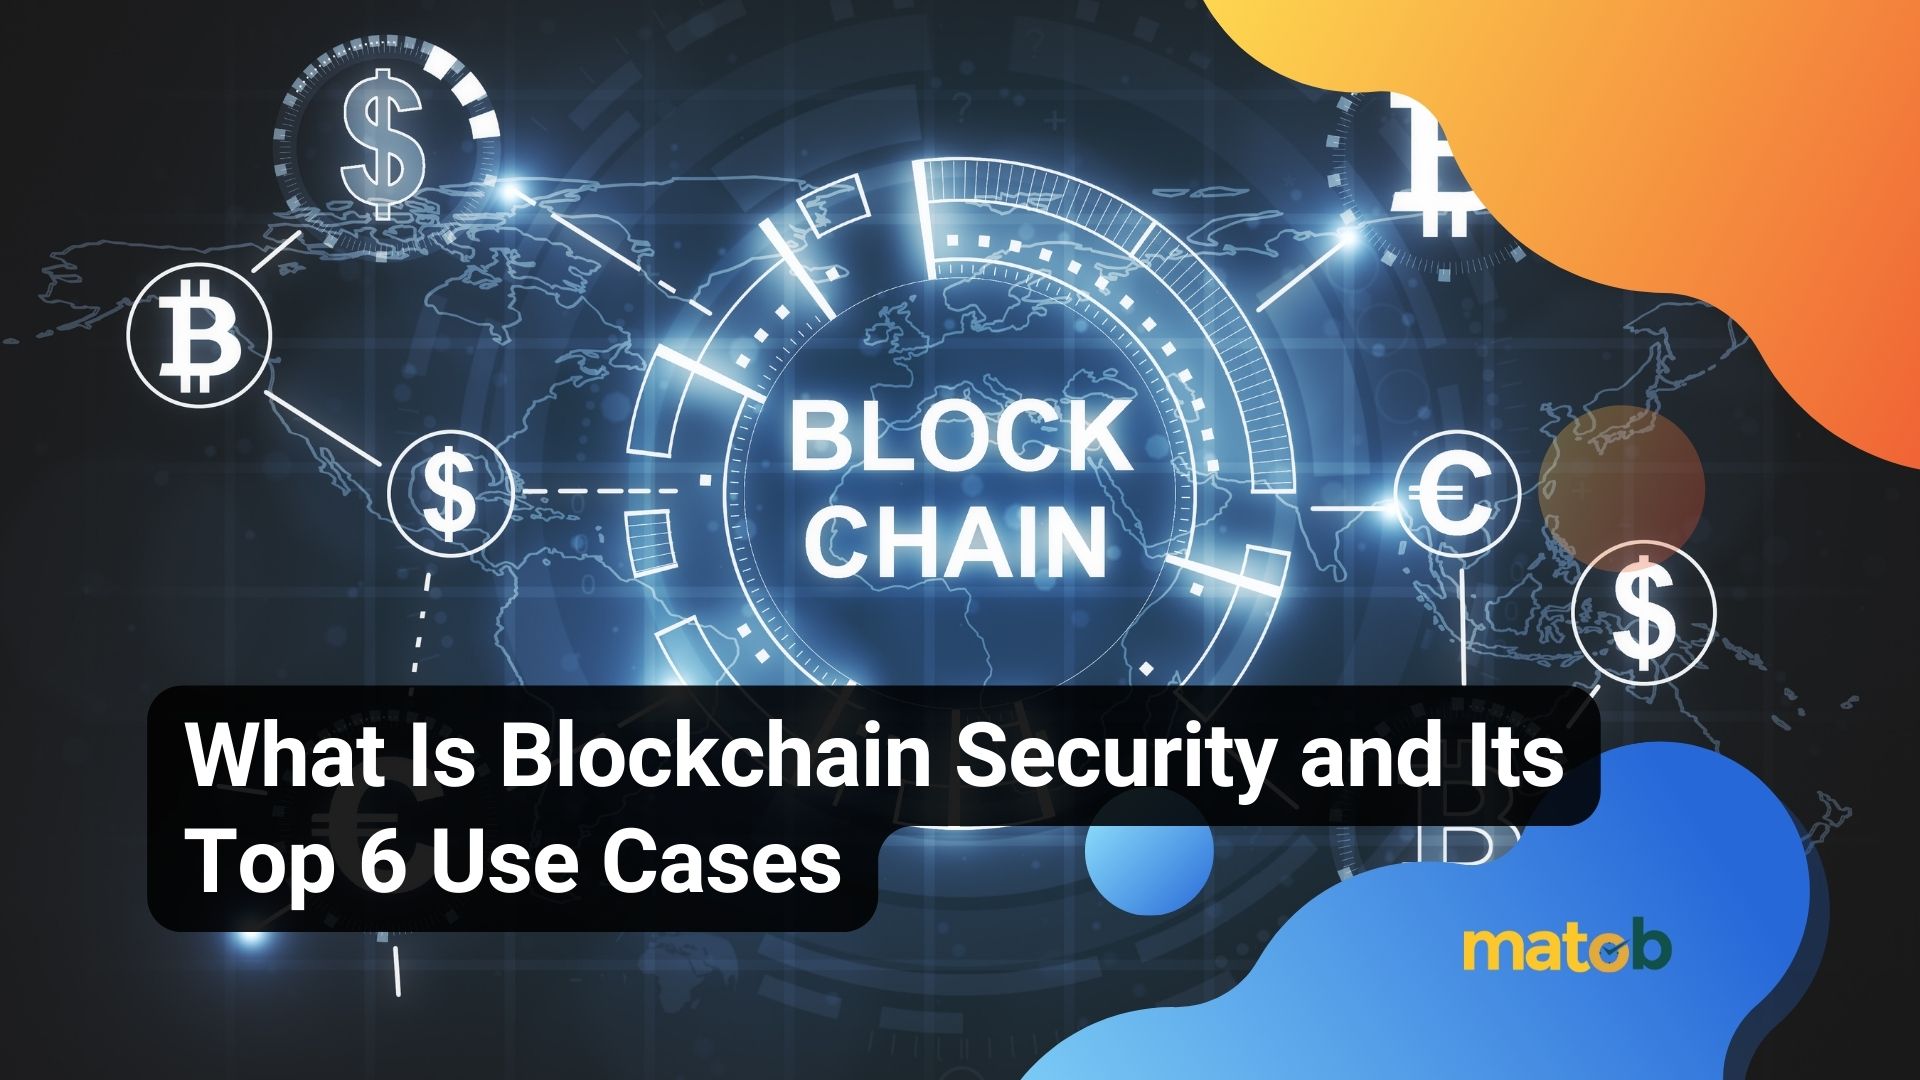 What Is Blockchain Security and Its Top 6 Use Cases